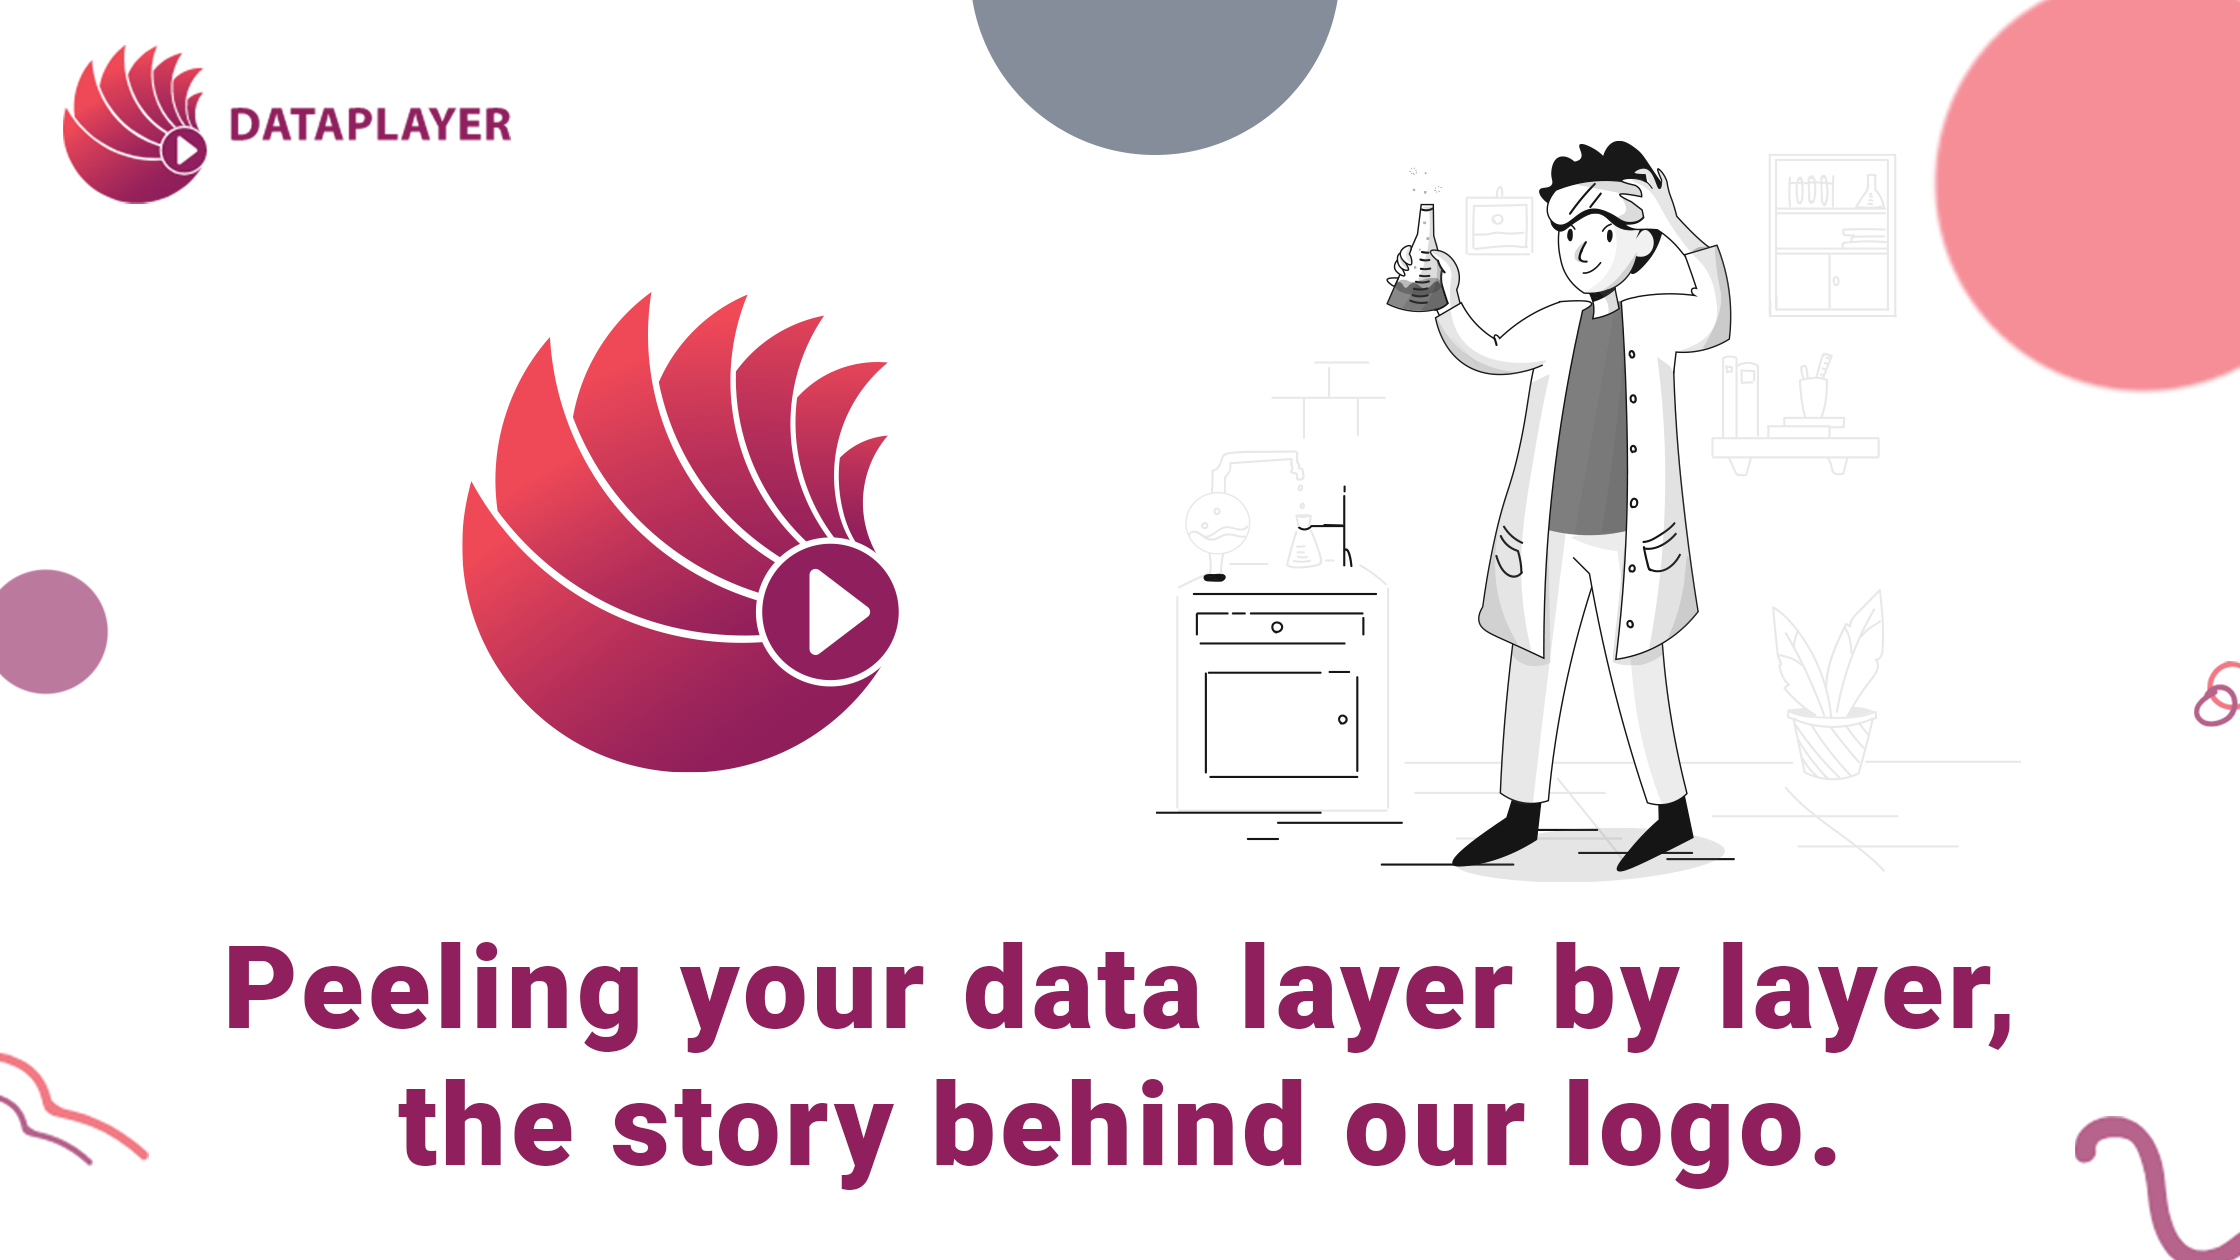 Peeling your data layer by layer, the story behind our logo.